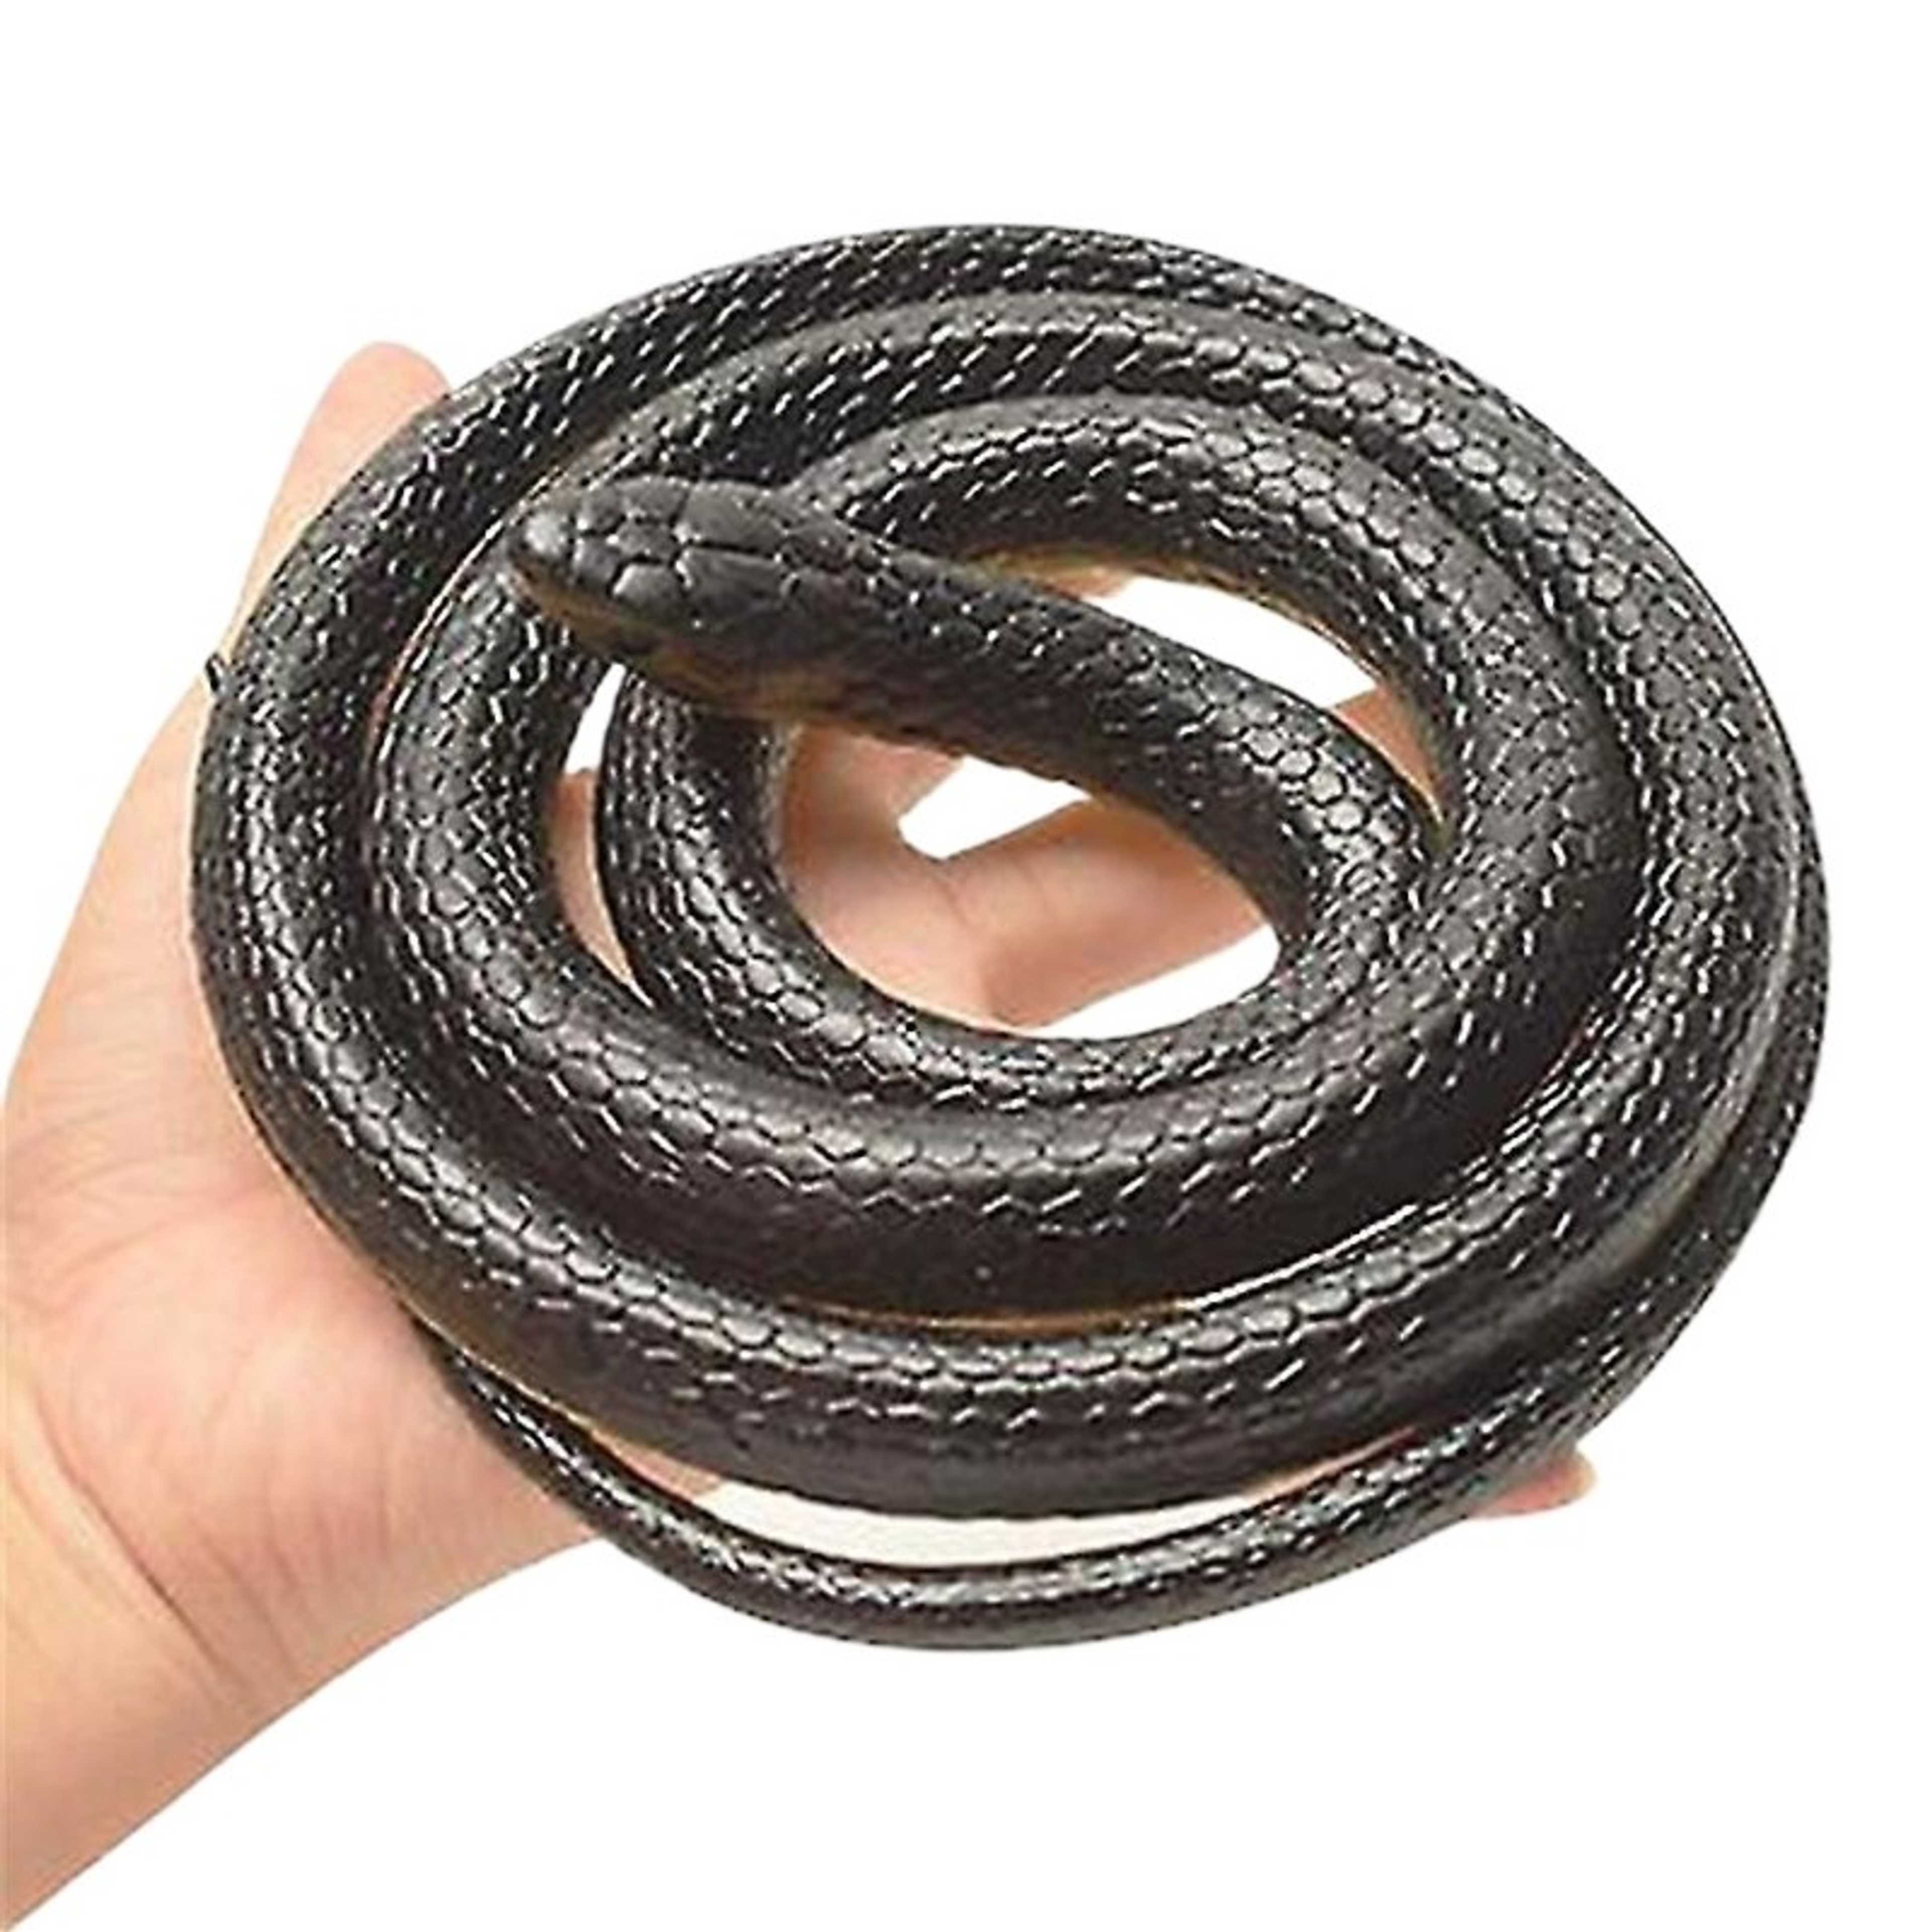 Artificial Rubber Snake (Size 20 To 25 Inches) Length Realistic Snake Lifelike Real Scary Rubber oy Prank Party Joke Halloween